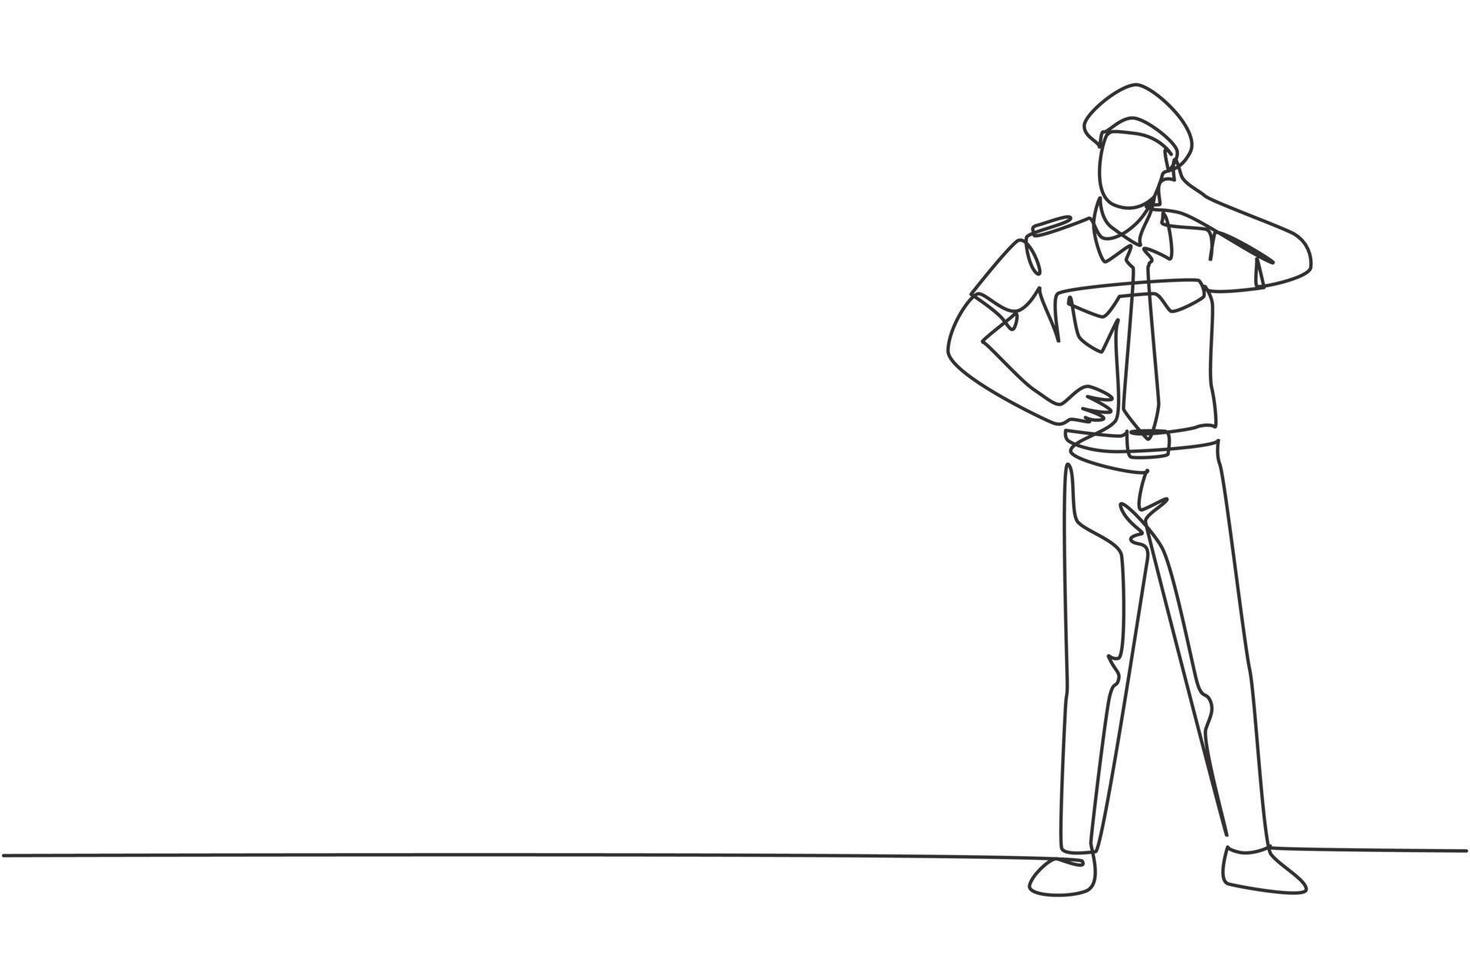 Single continuous line drawing pilot stands with call me gesture and complete uniform serves airplane passengers fly to destination. Professional job. One line draw graphic design vector illustration